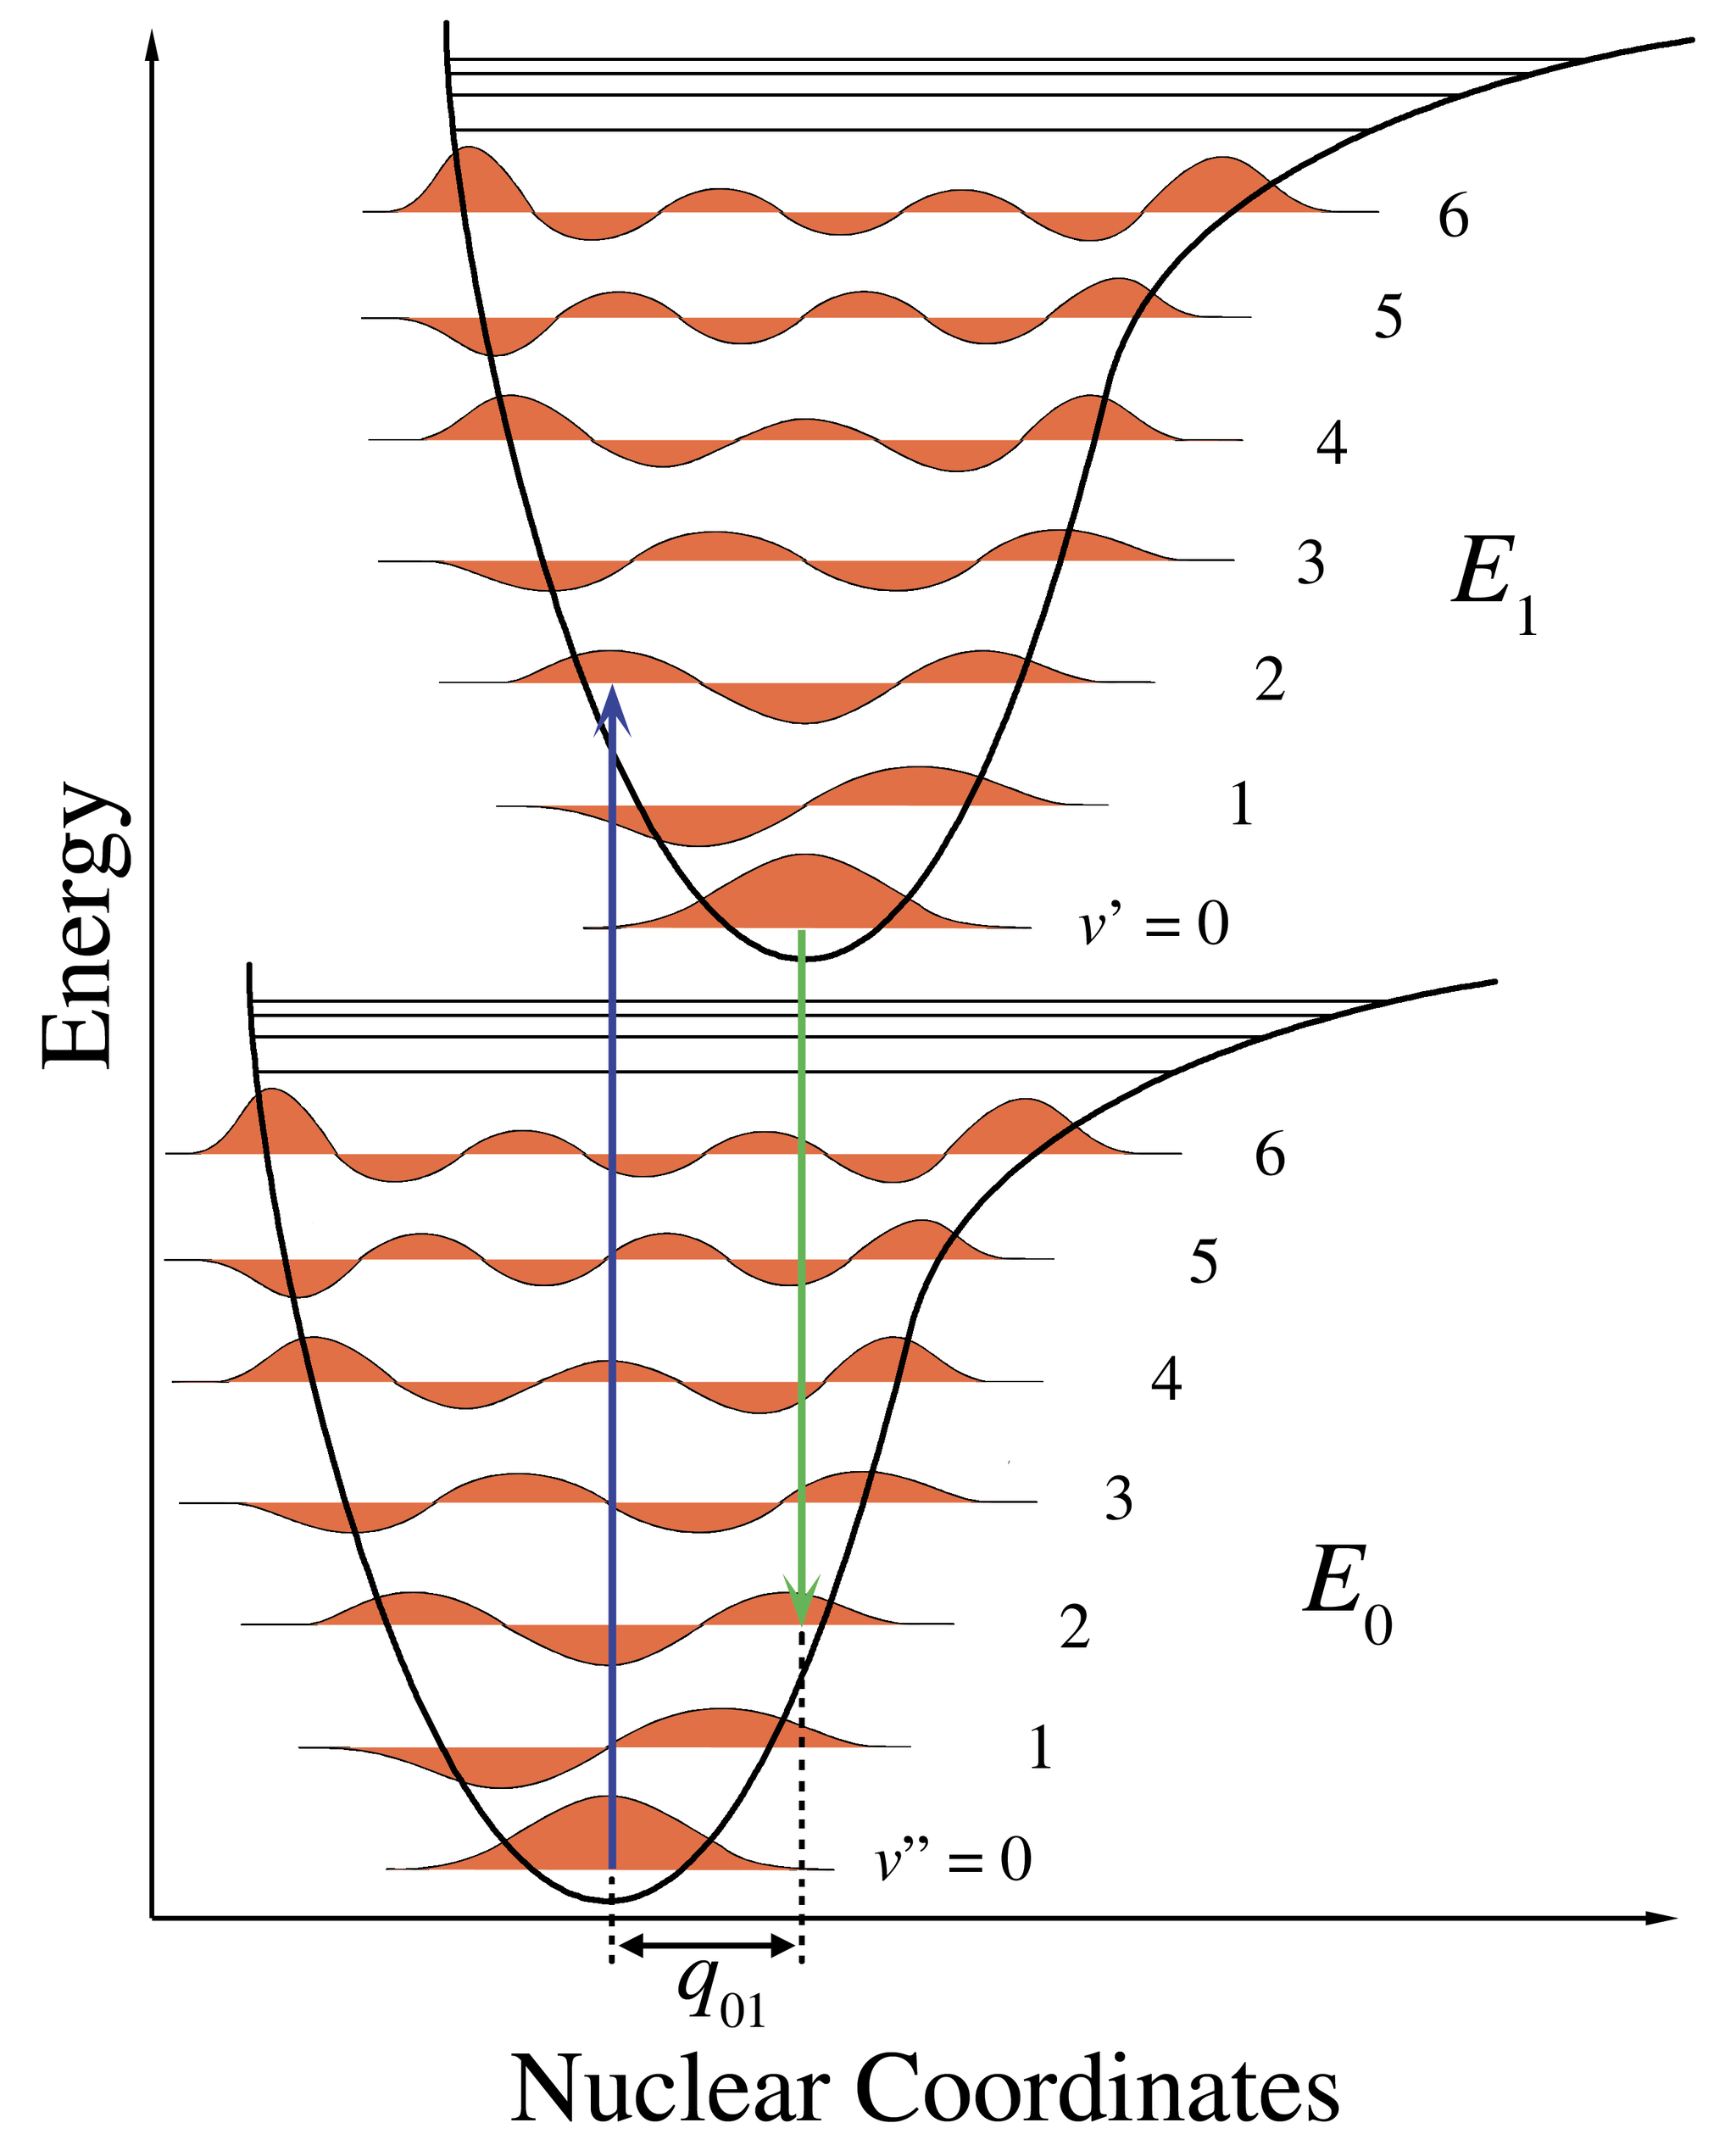 The vertical line of the absorption transition as the electron is promoted from the ground state to the excited state. The probability of the electron being excited into each vibrational level is given by the ‘overlap’ of the wave functions of ground and each excited state. Franck-Condon Diagram  (https://commons.wikimedia.org/wiki/File:Franck-Condon-diagram.png). From Wikimedia Commons, created by [Mark M. Somoza](http://www.gnu.org/licenses/fdl-1.3.html), CC-BY-SA-[3.0](https://creativecommons.org/licenses/by-sa/3.0/). Sept 14. 